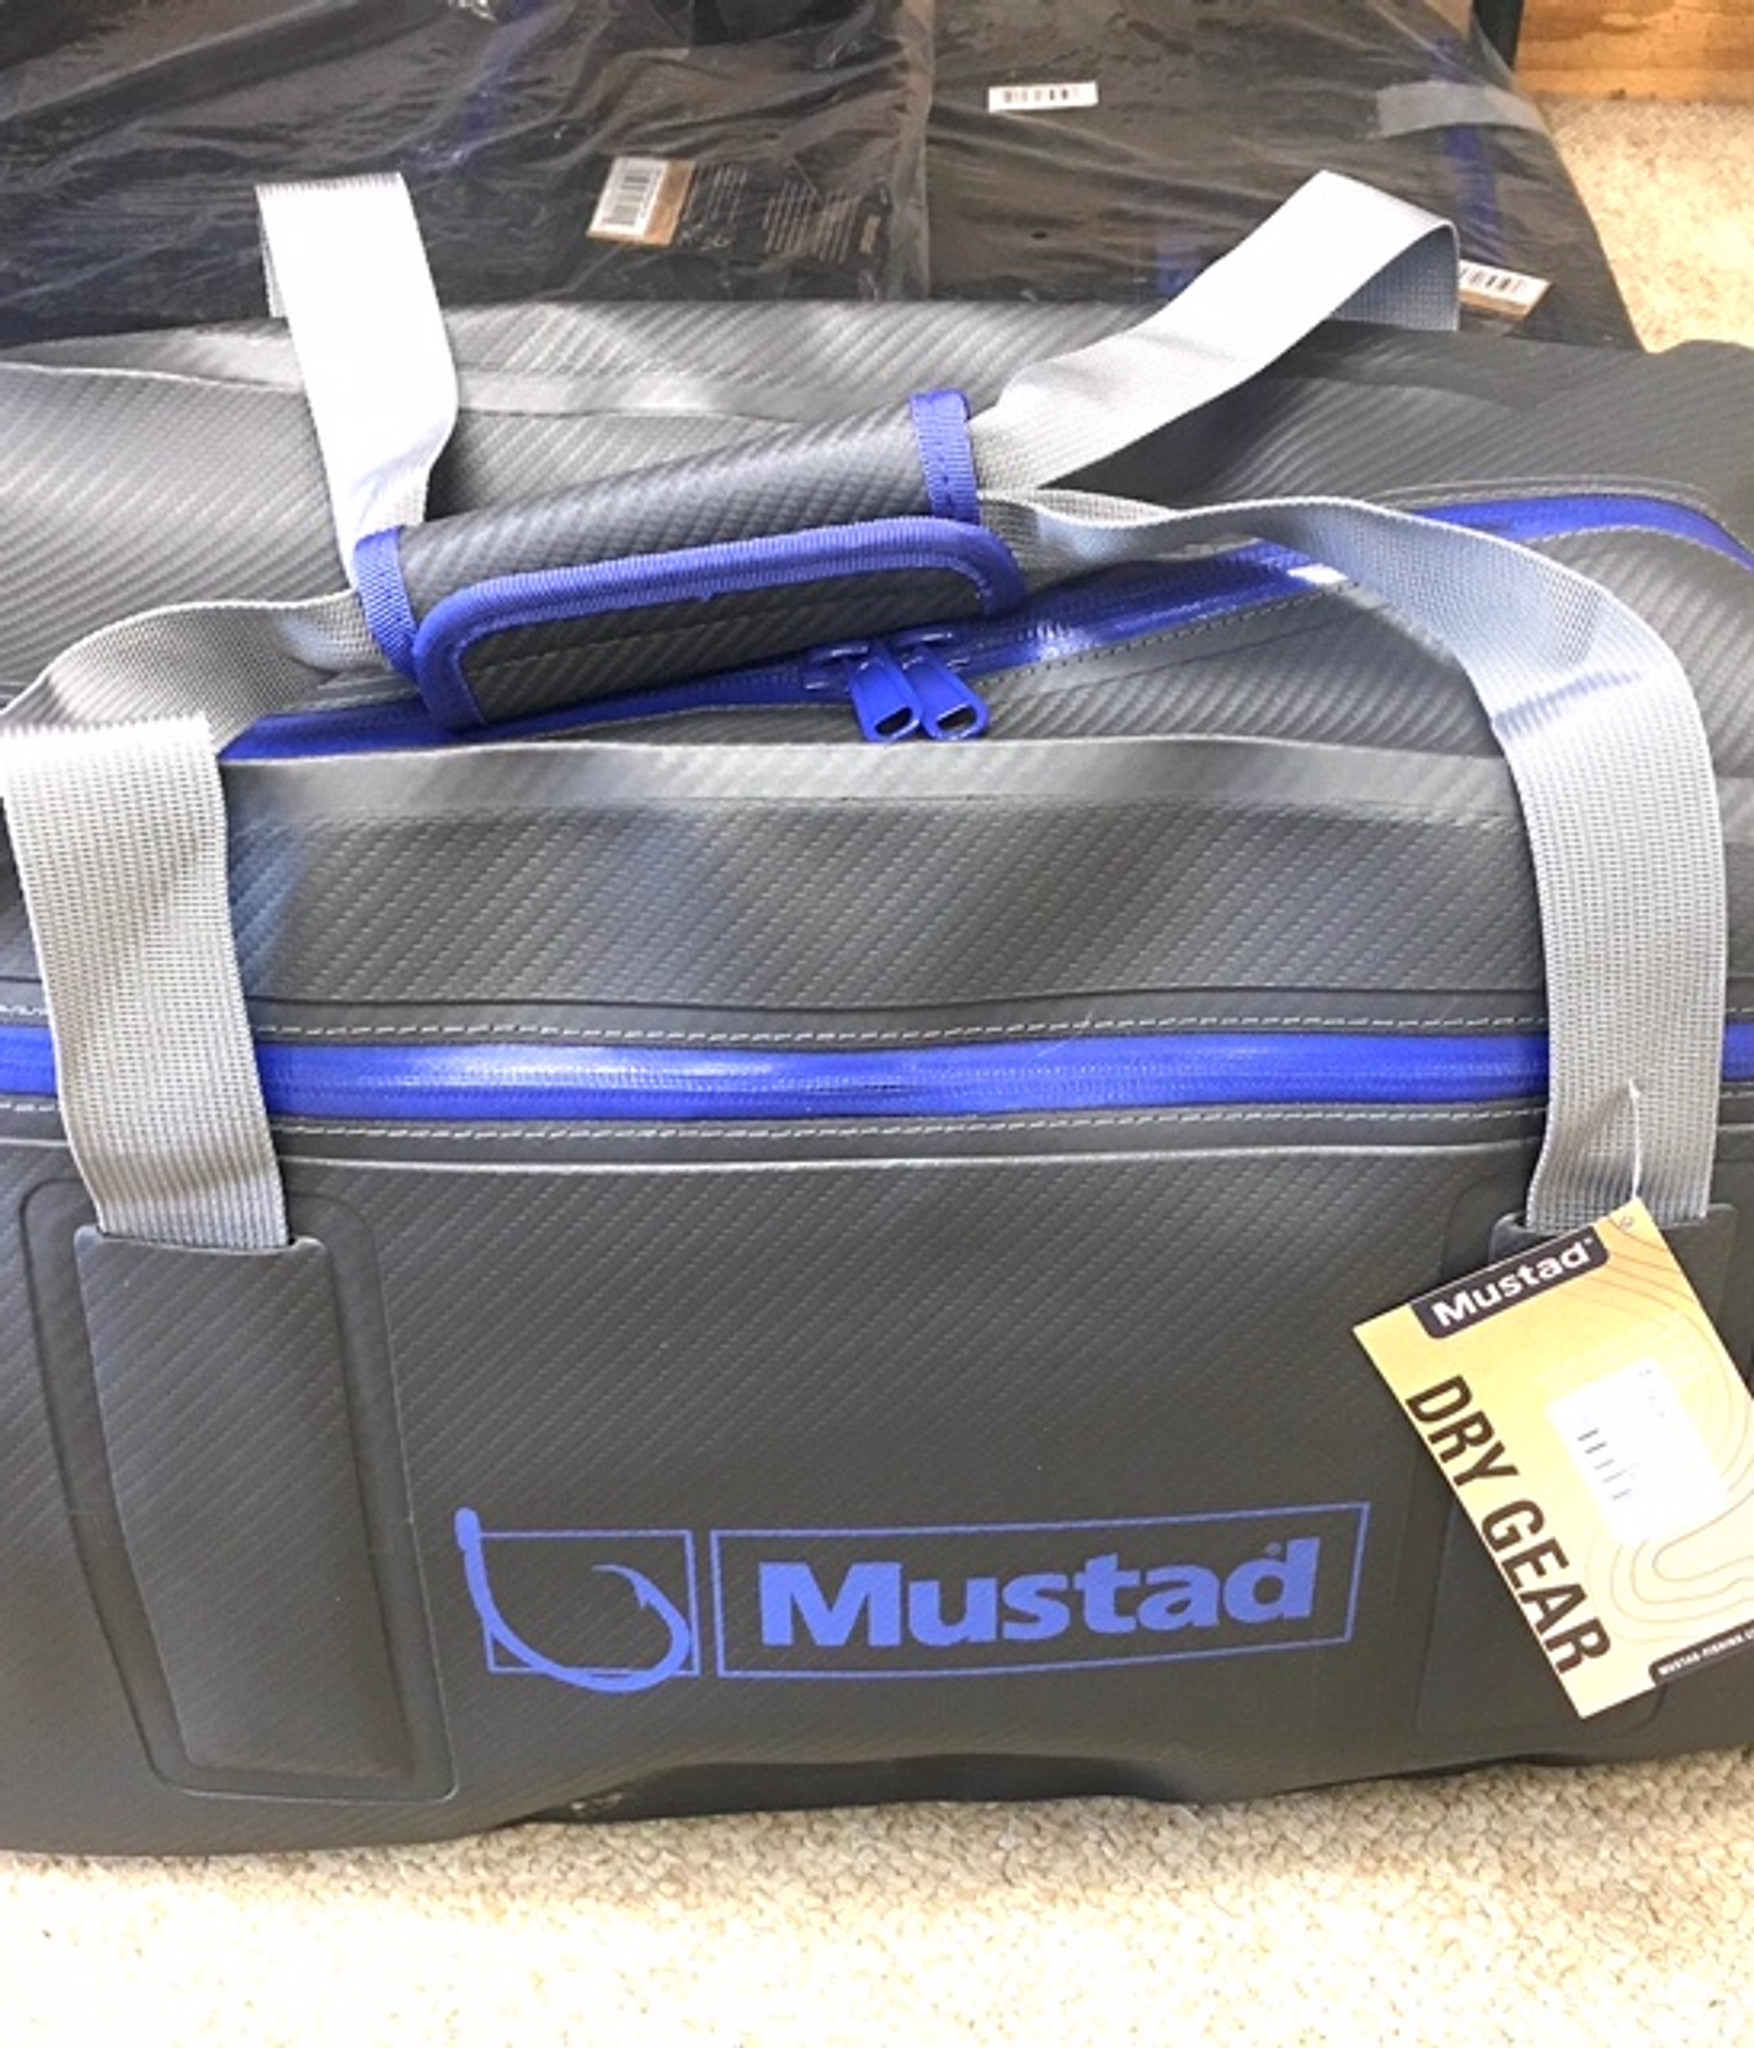 Mustad Dry Duffel Bag 50L - FlyMasters of Indianapolis